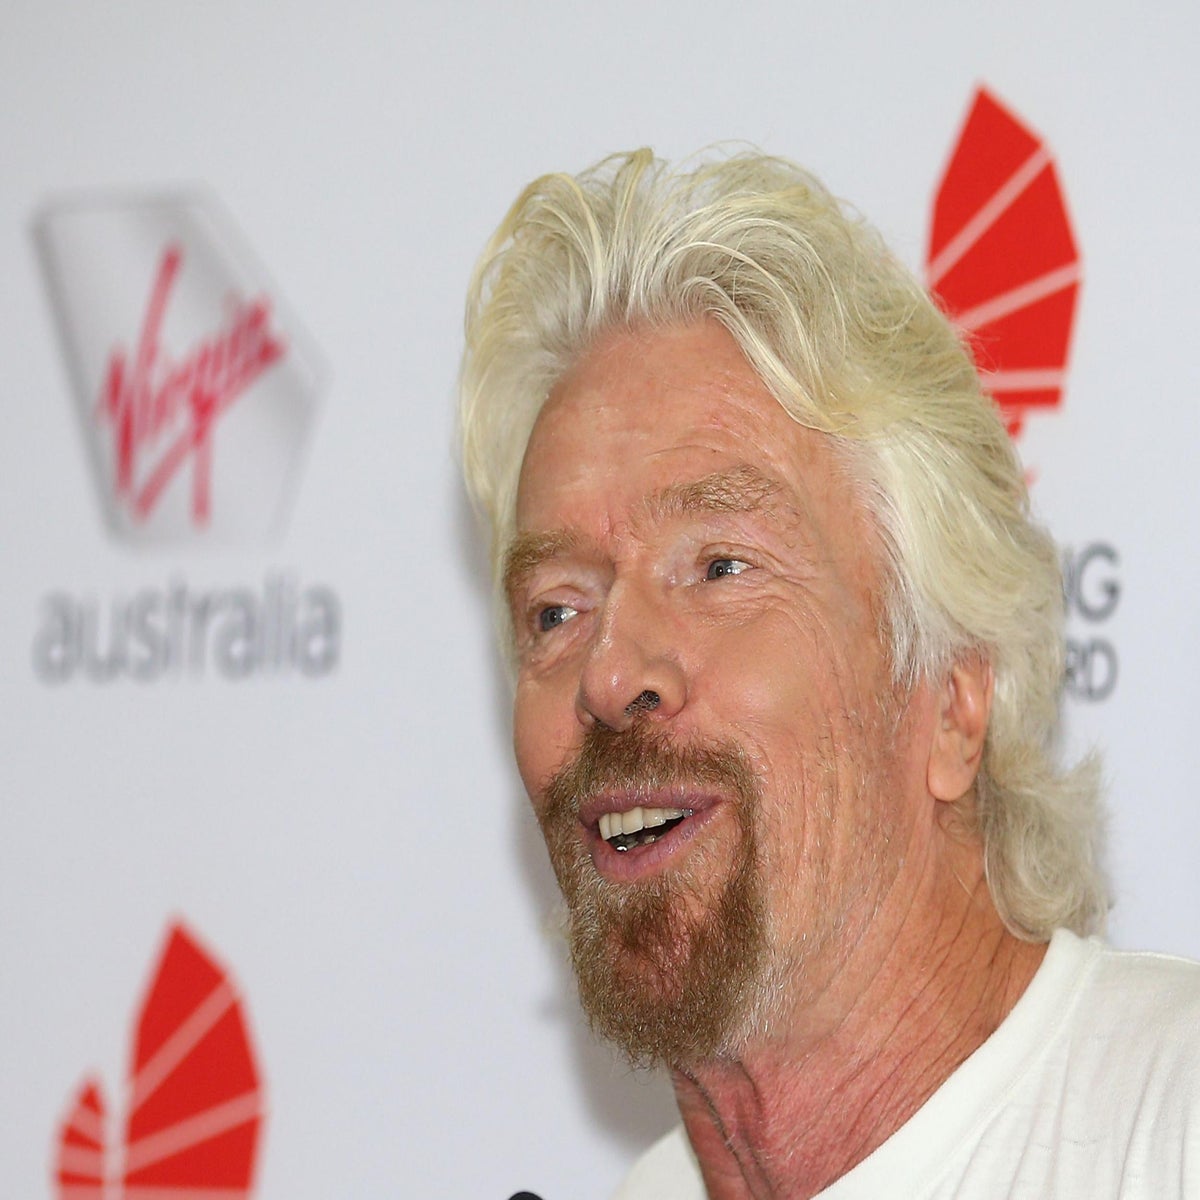 Richard Branson Launches A.I. Campaign to Help People With